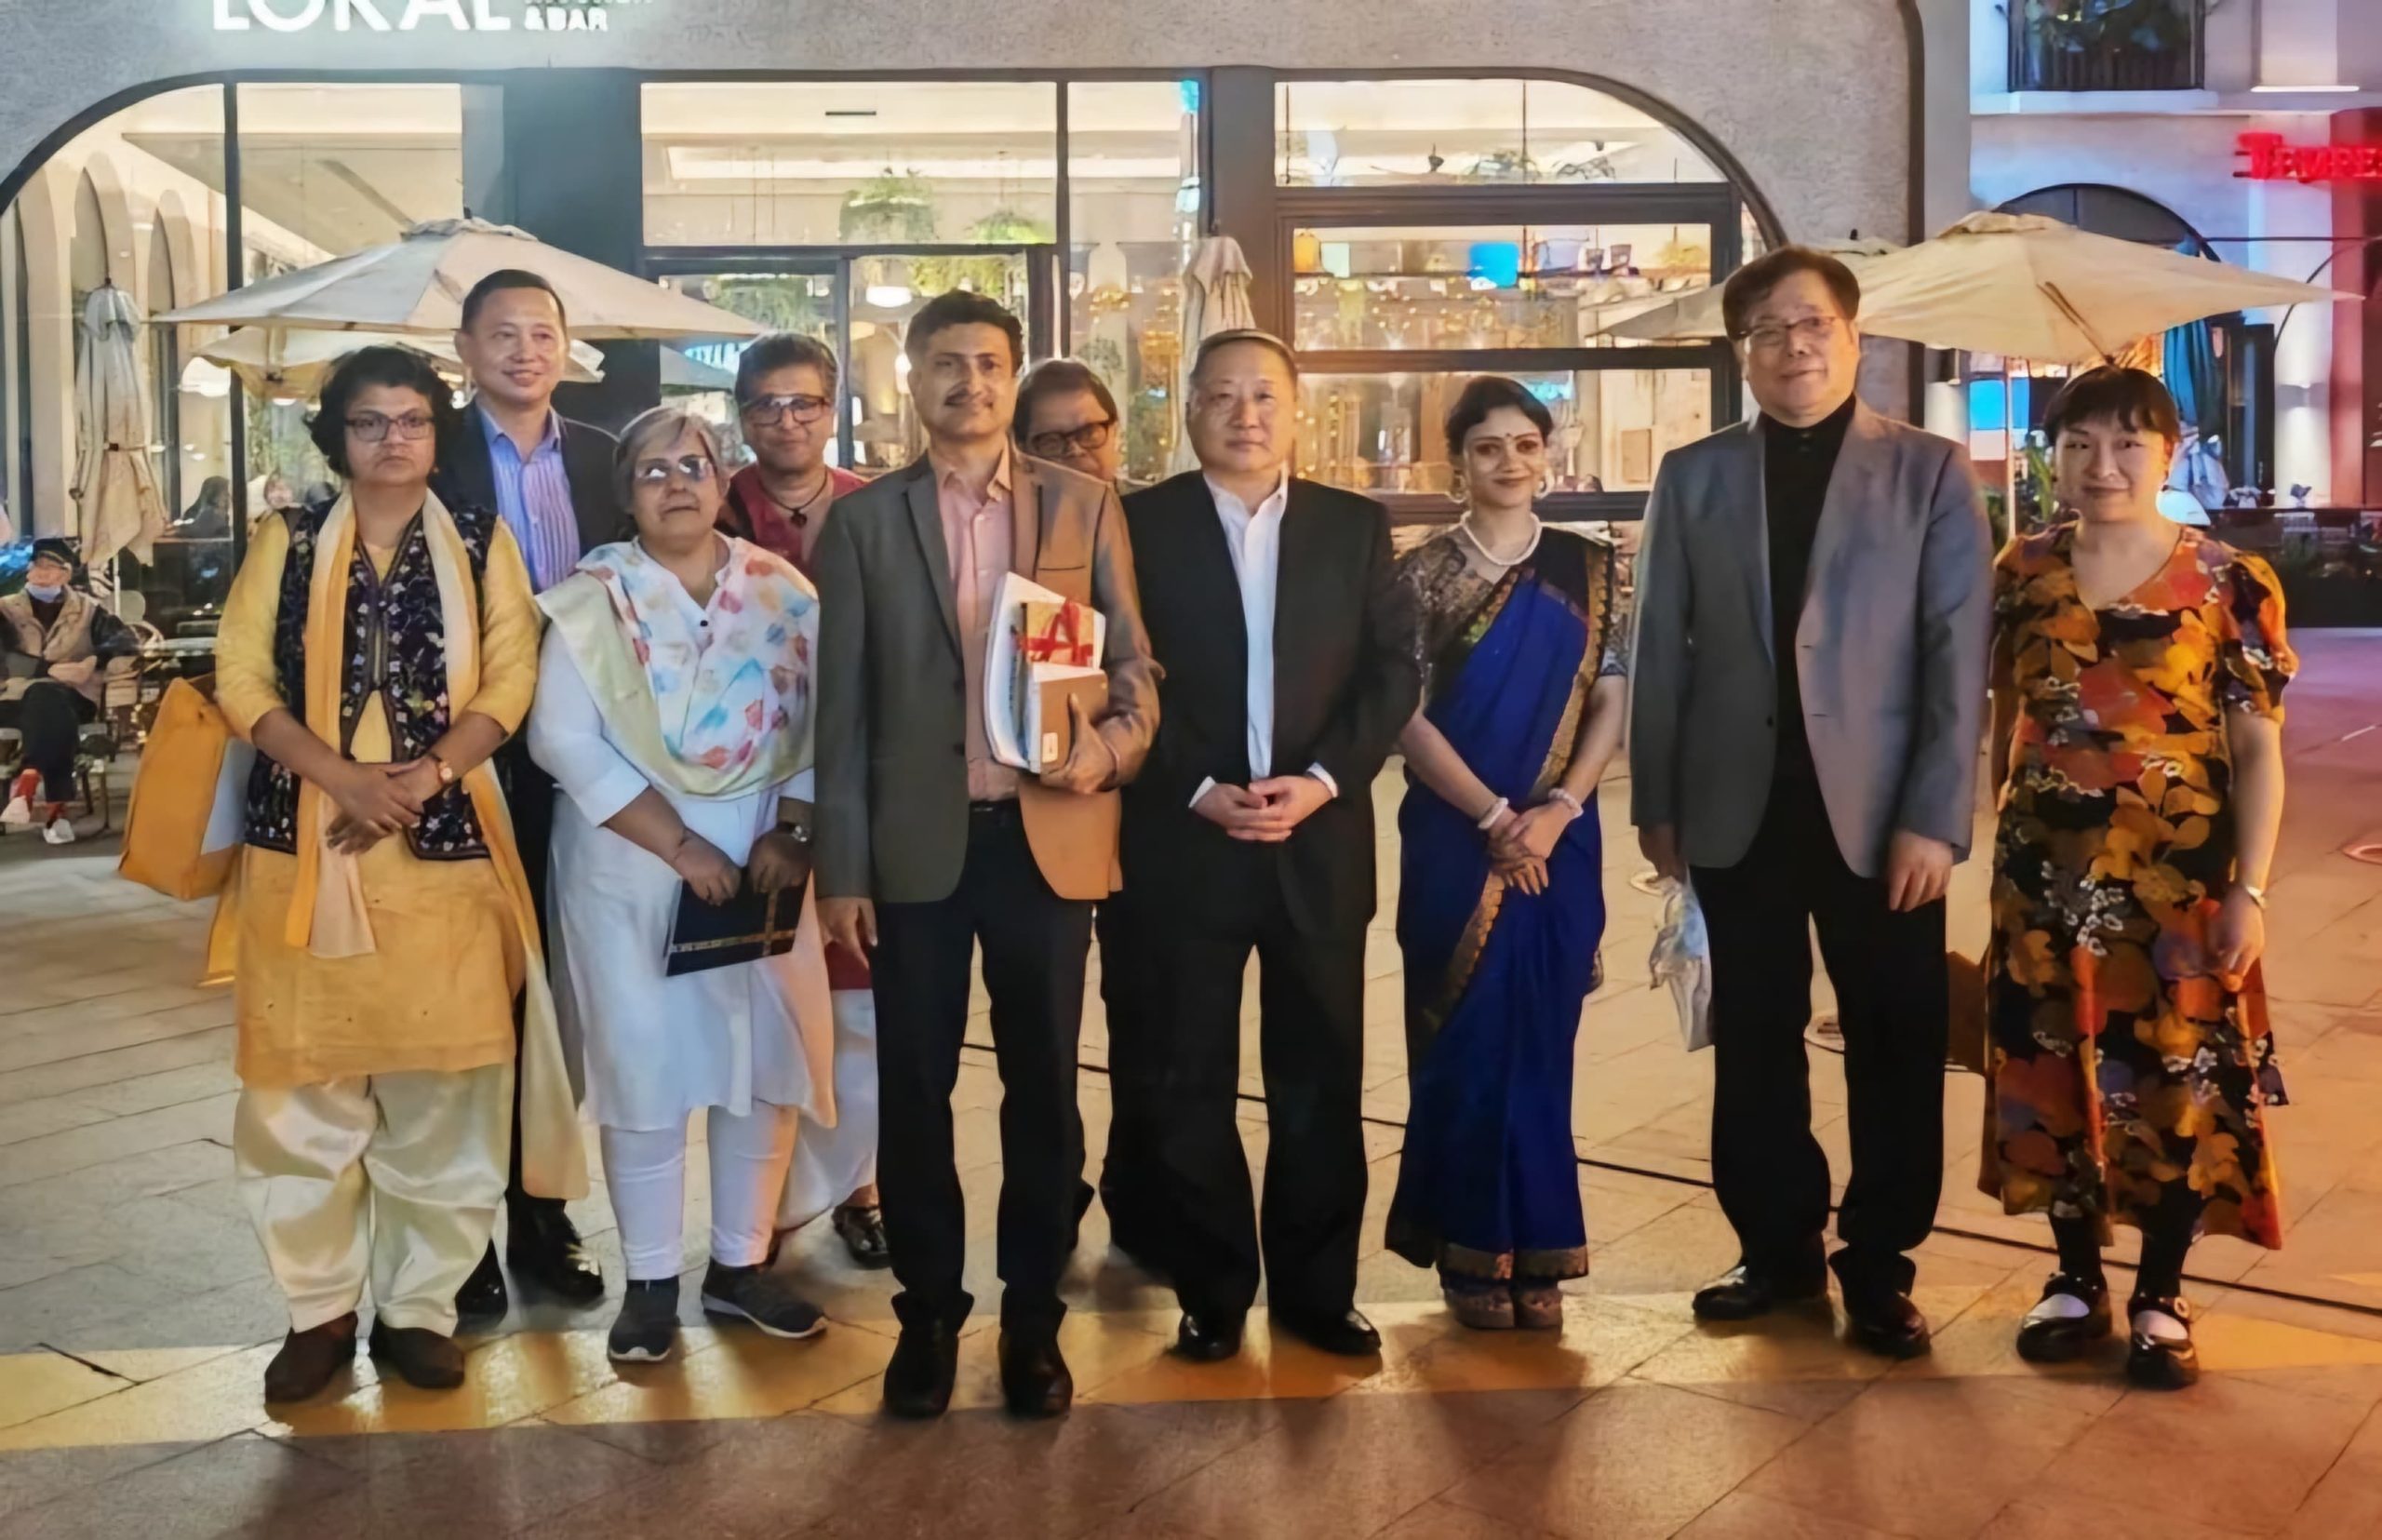 The centenary of Rabindranath Tagore's visit to China was celebrated with a visit by Indian delegates to China.